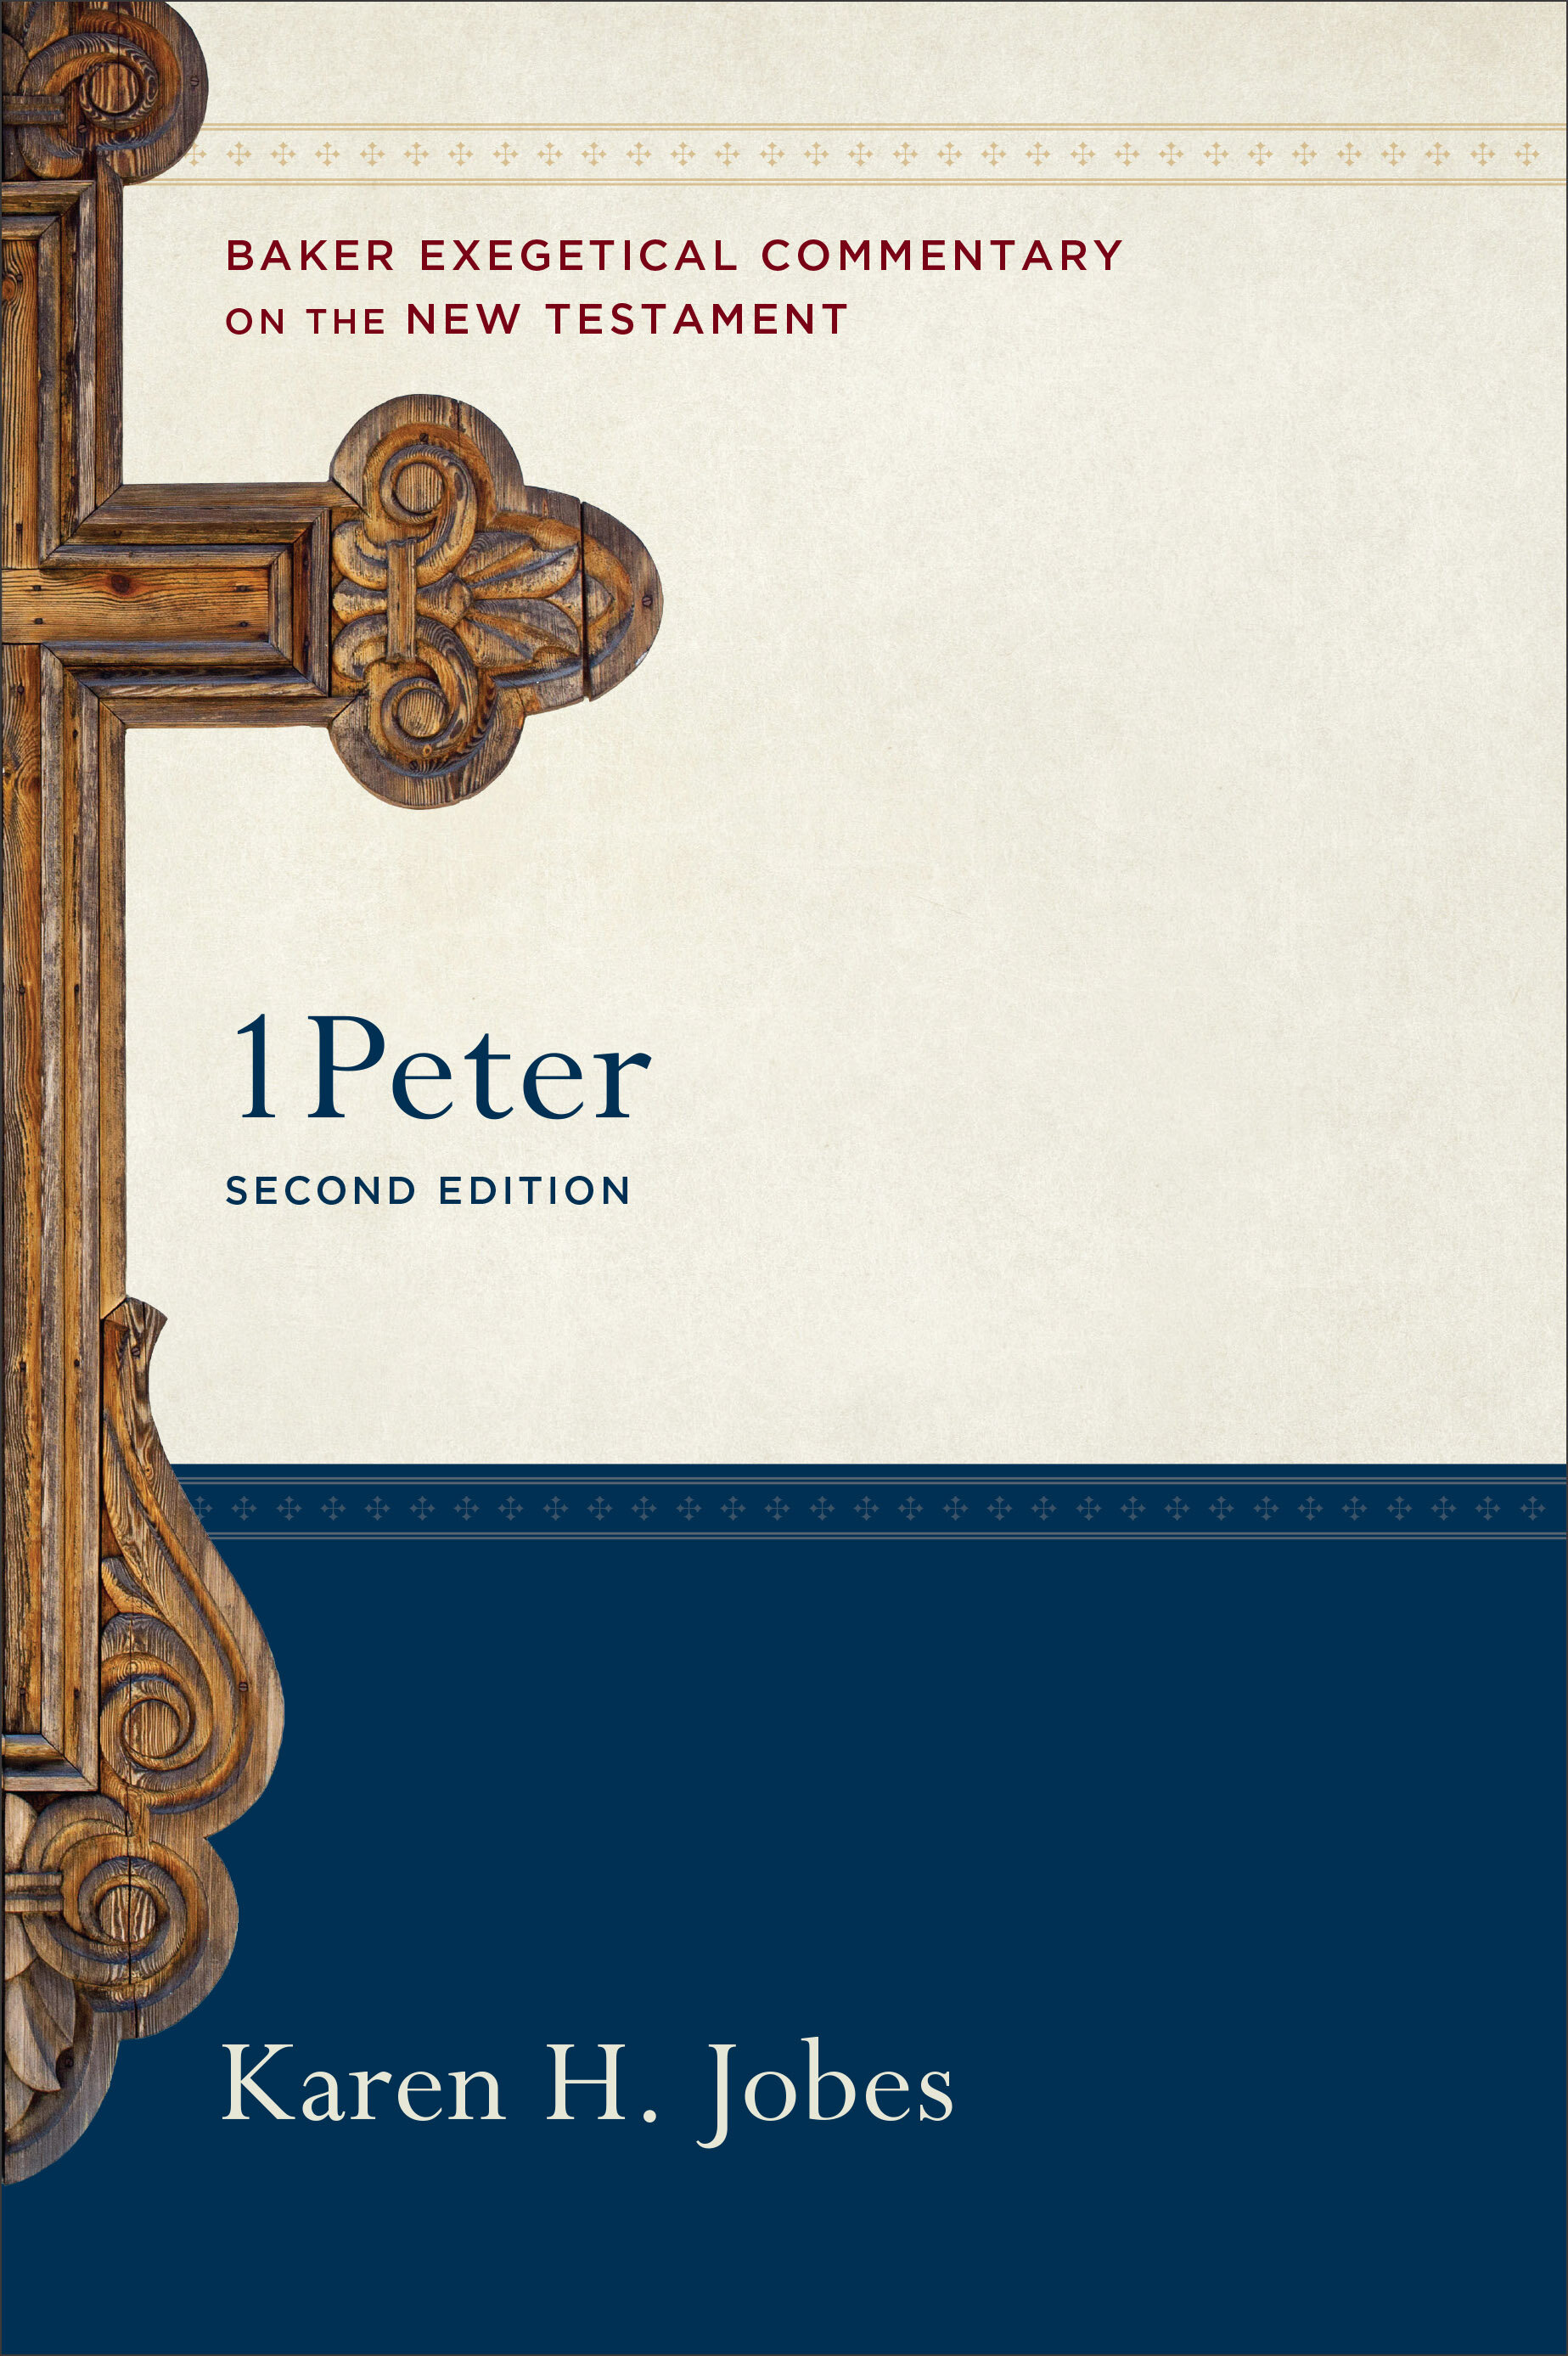 1 Peter, 2nd ed. (Baker Exegetical Commentary on the New Testament | BECNT)